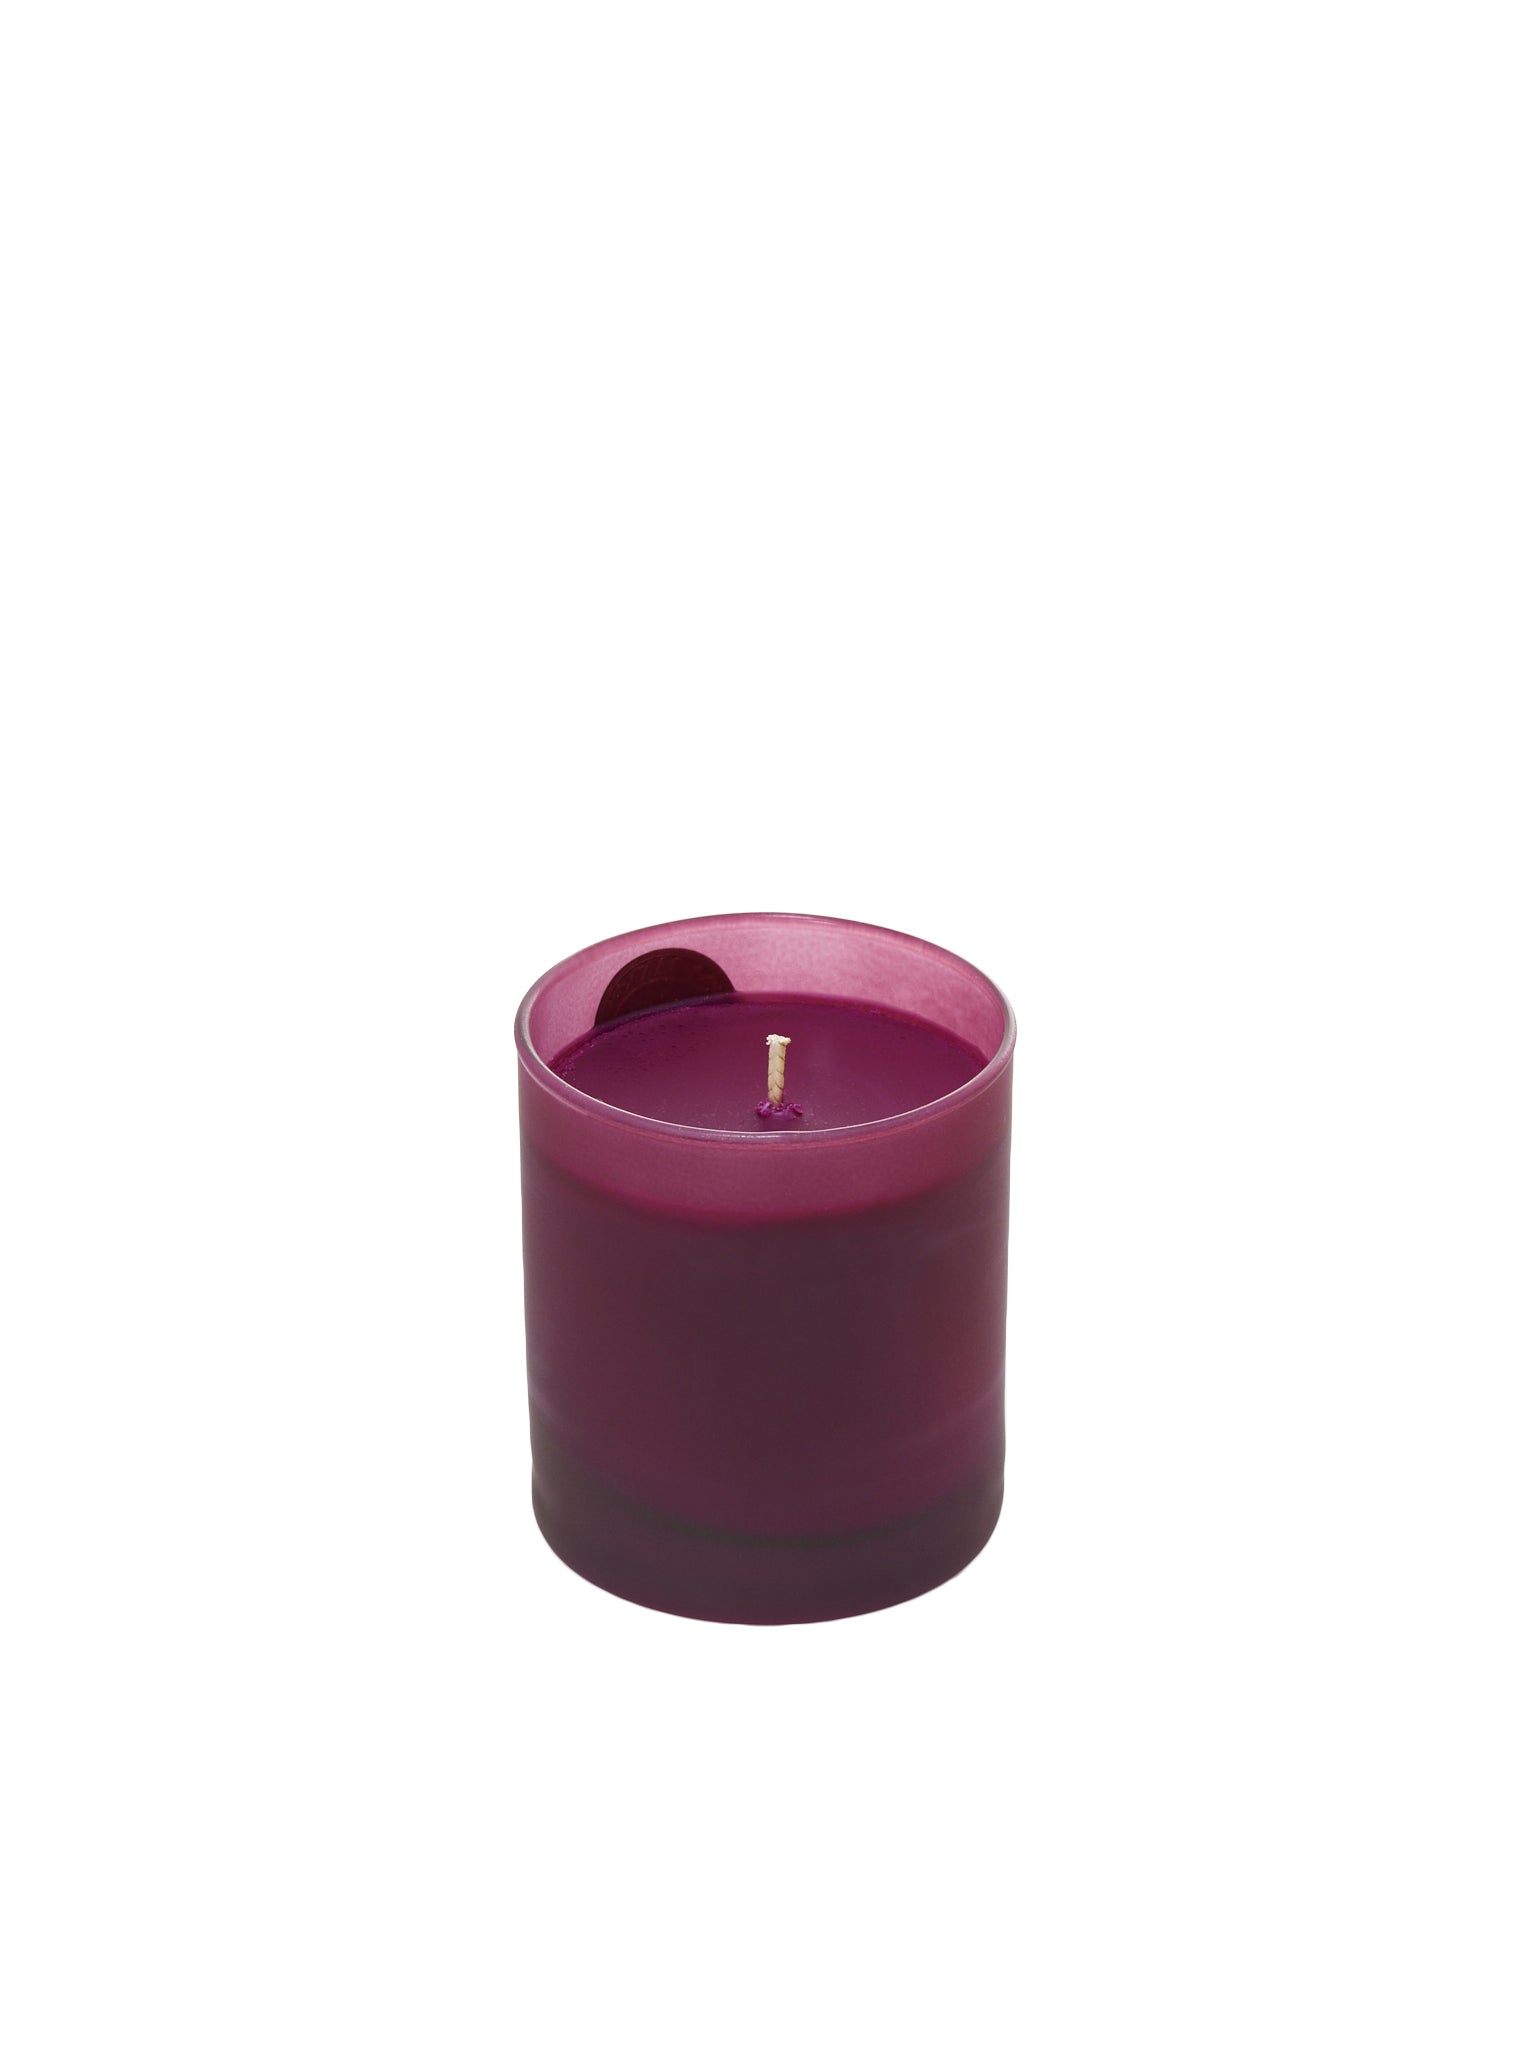 Bougeotte Scented Candle | H. Lorenzo - detail 